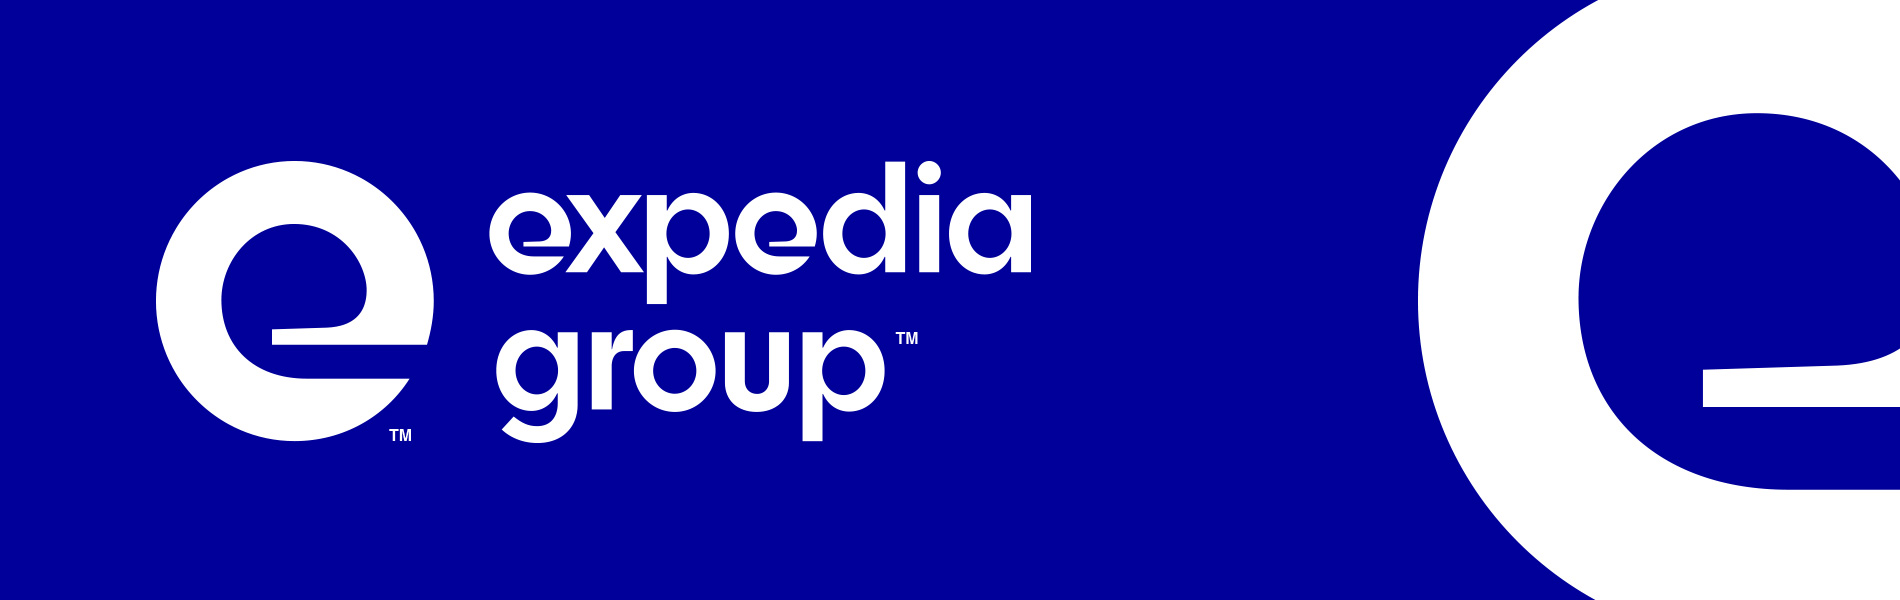 Expedia group